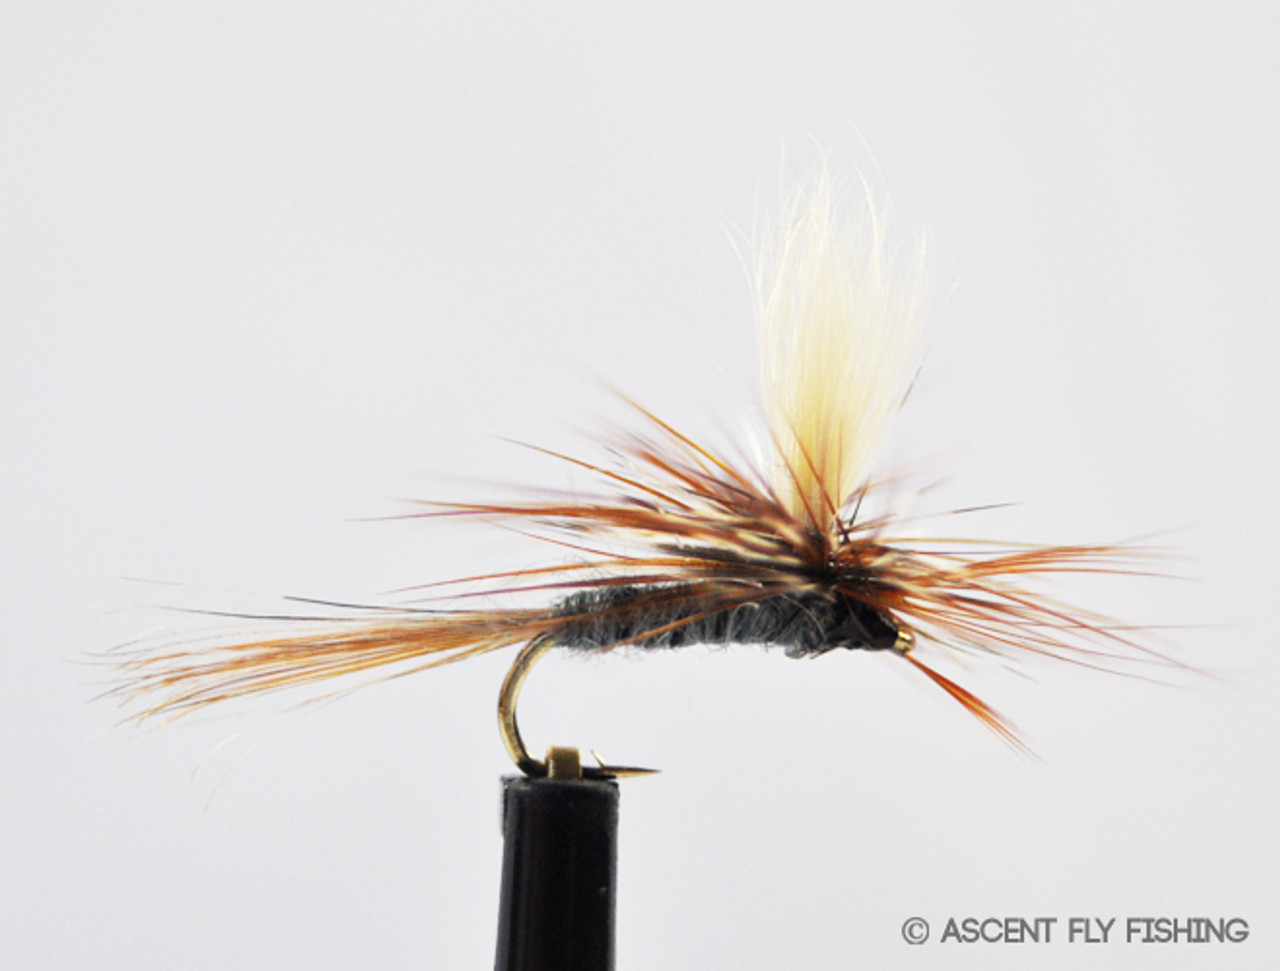 Parachute Cricket - Ascent Fly Fishing